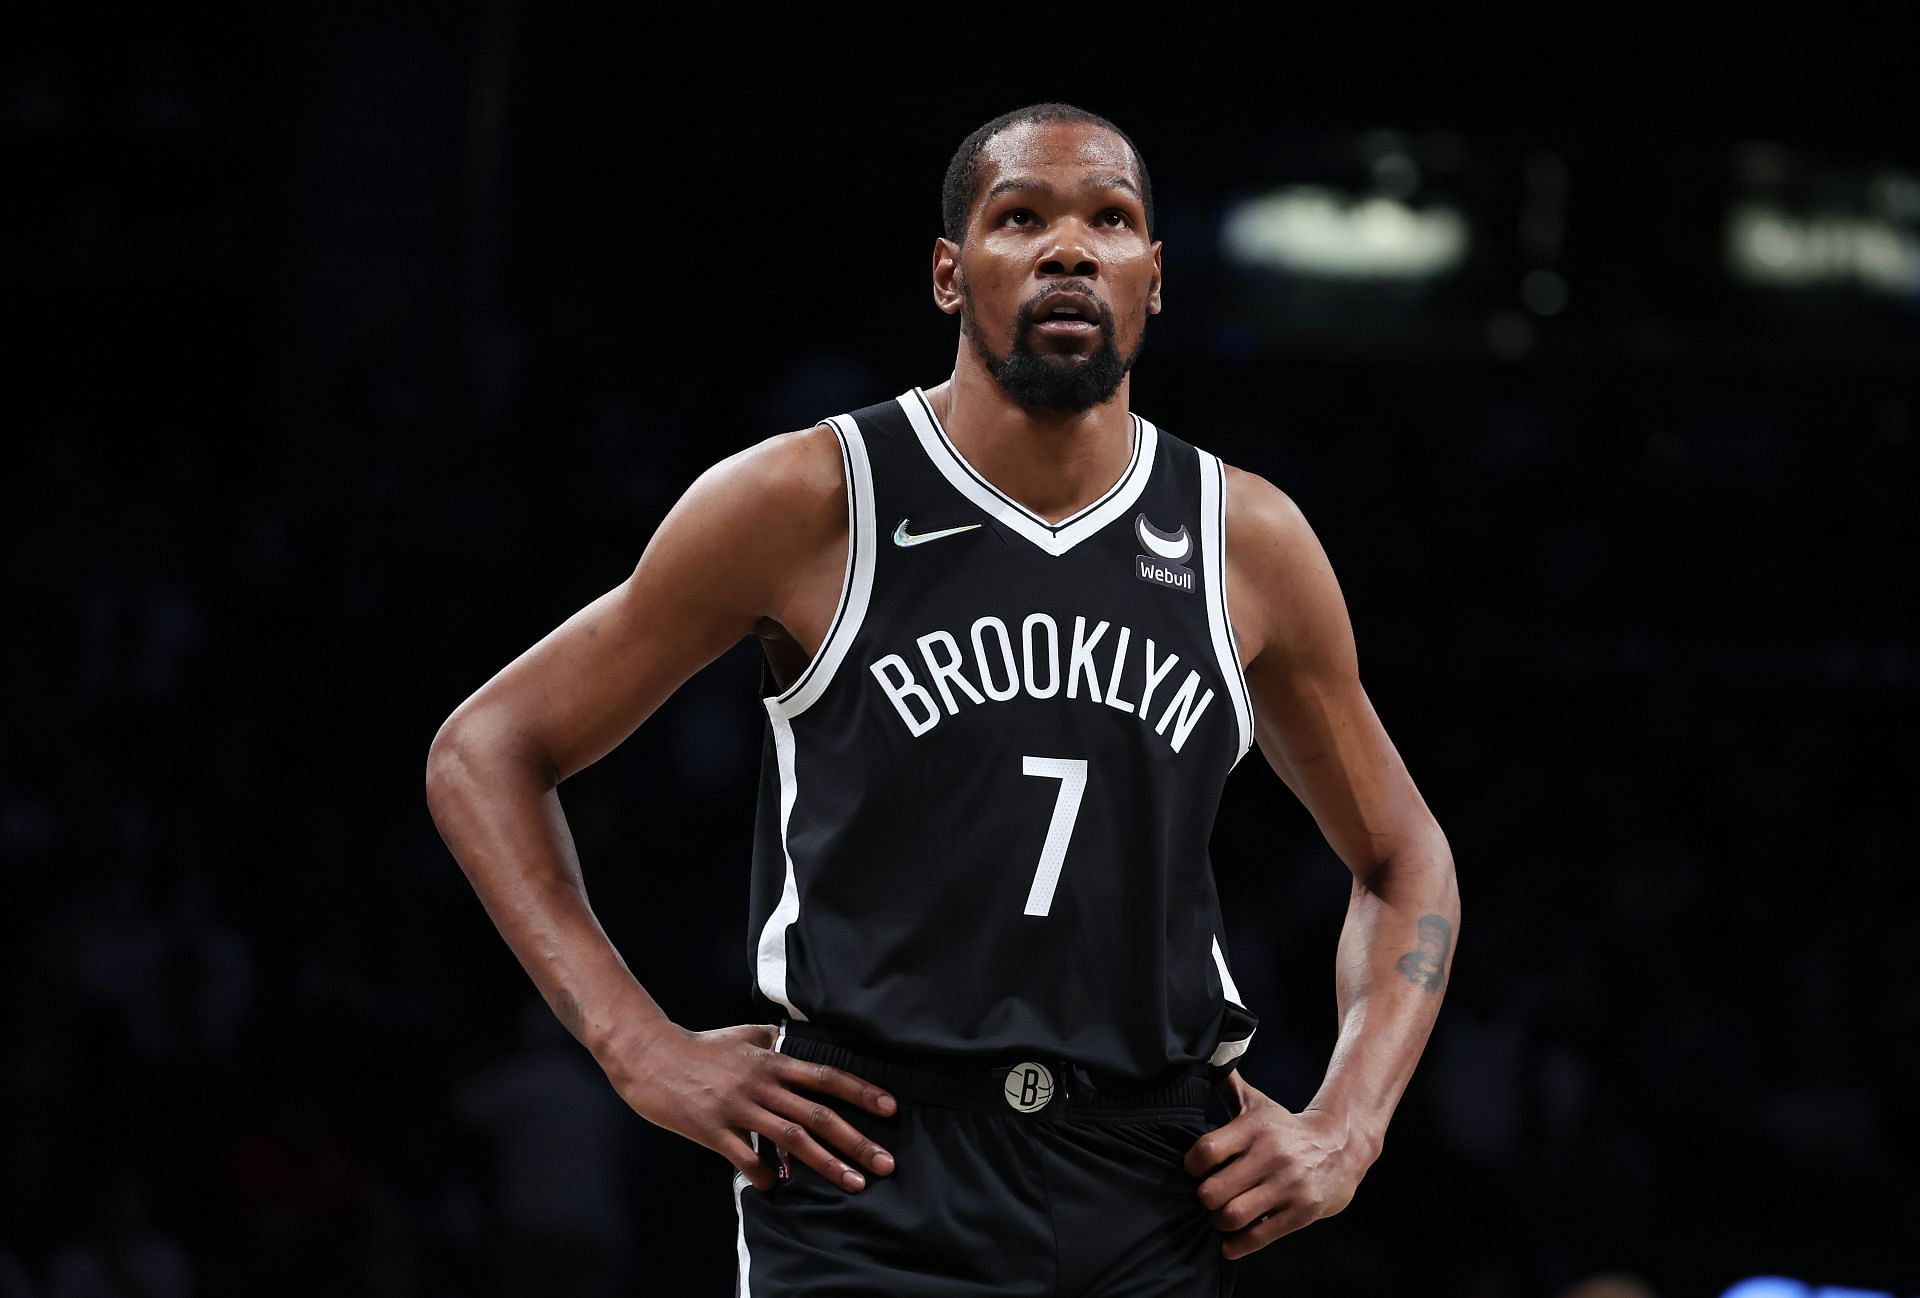 Kevin Durant of the Brooklyn Nets against the Dallas Mavericks